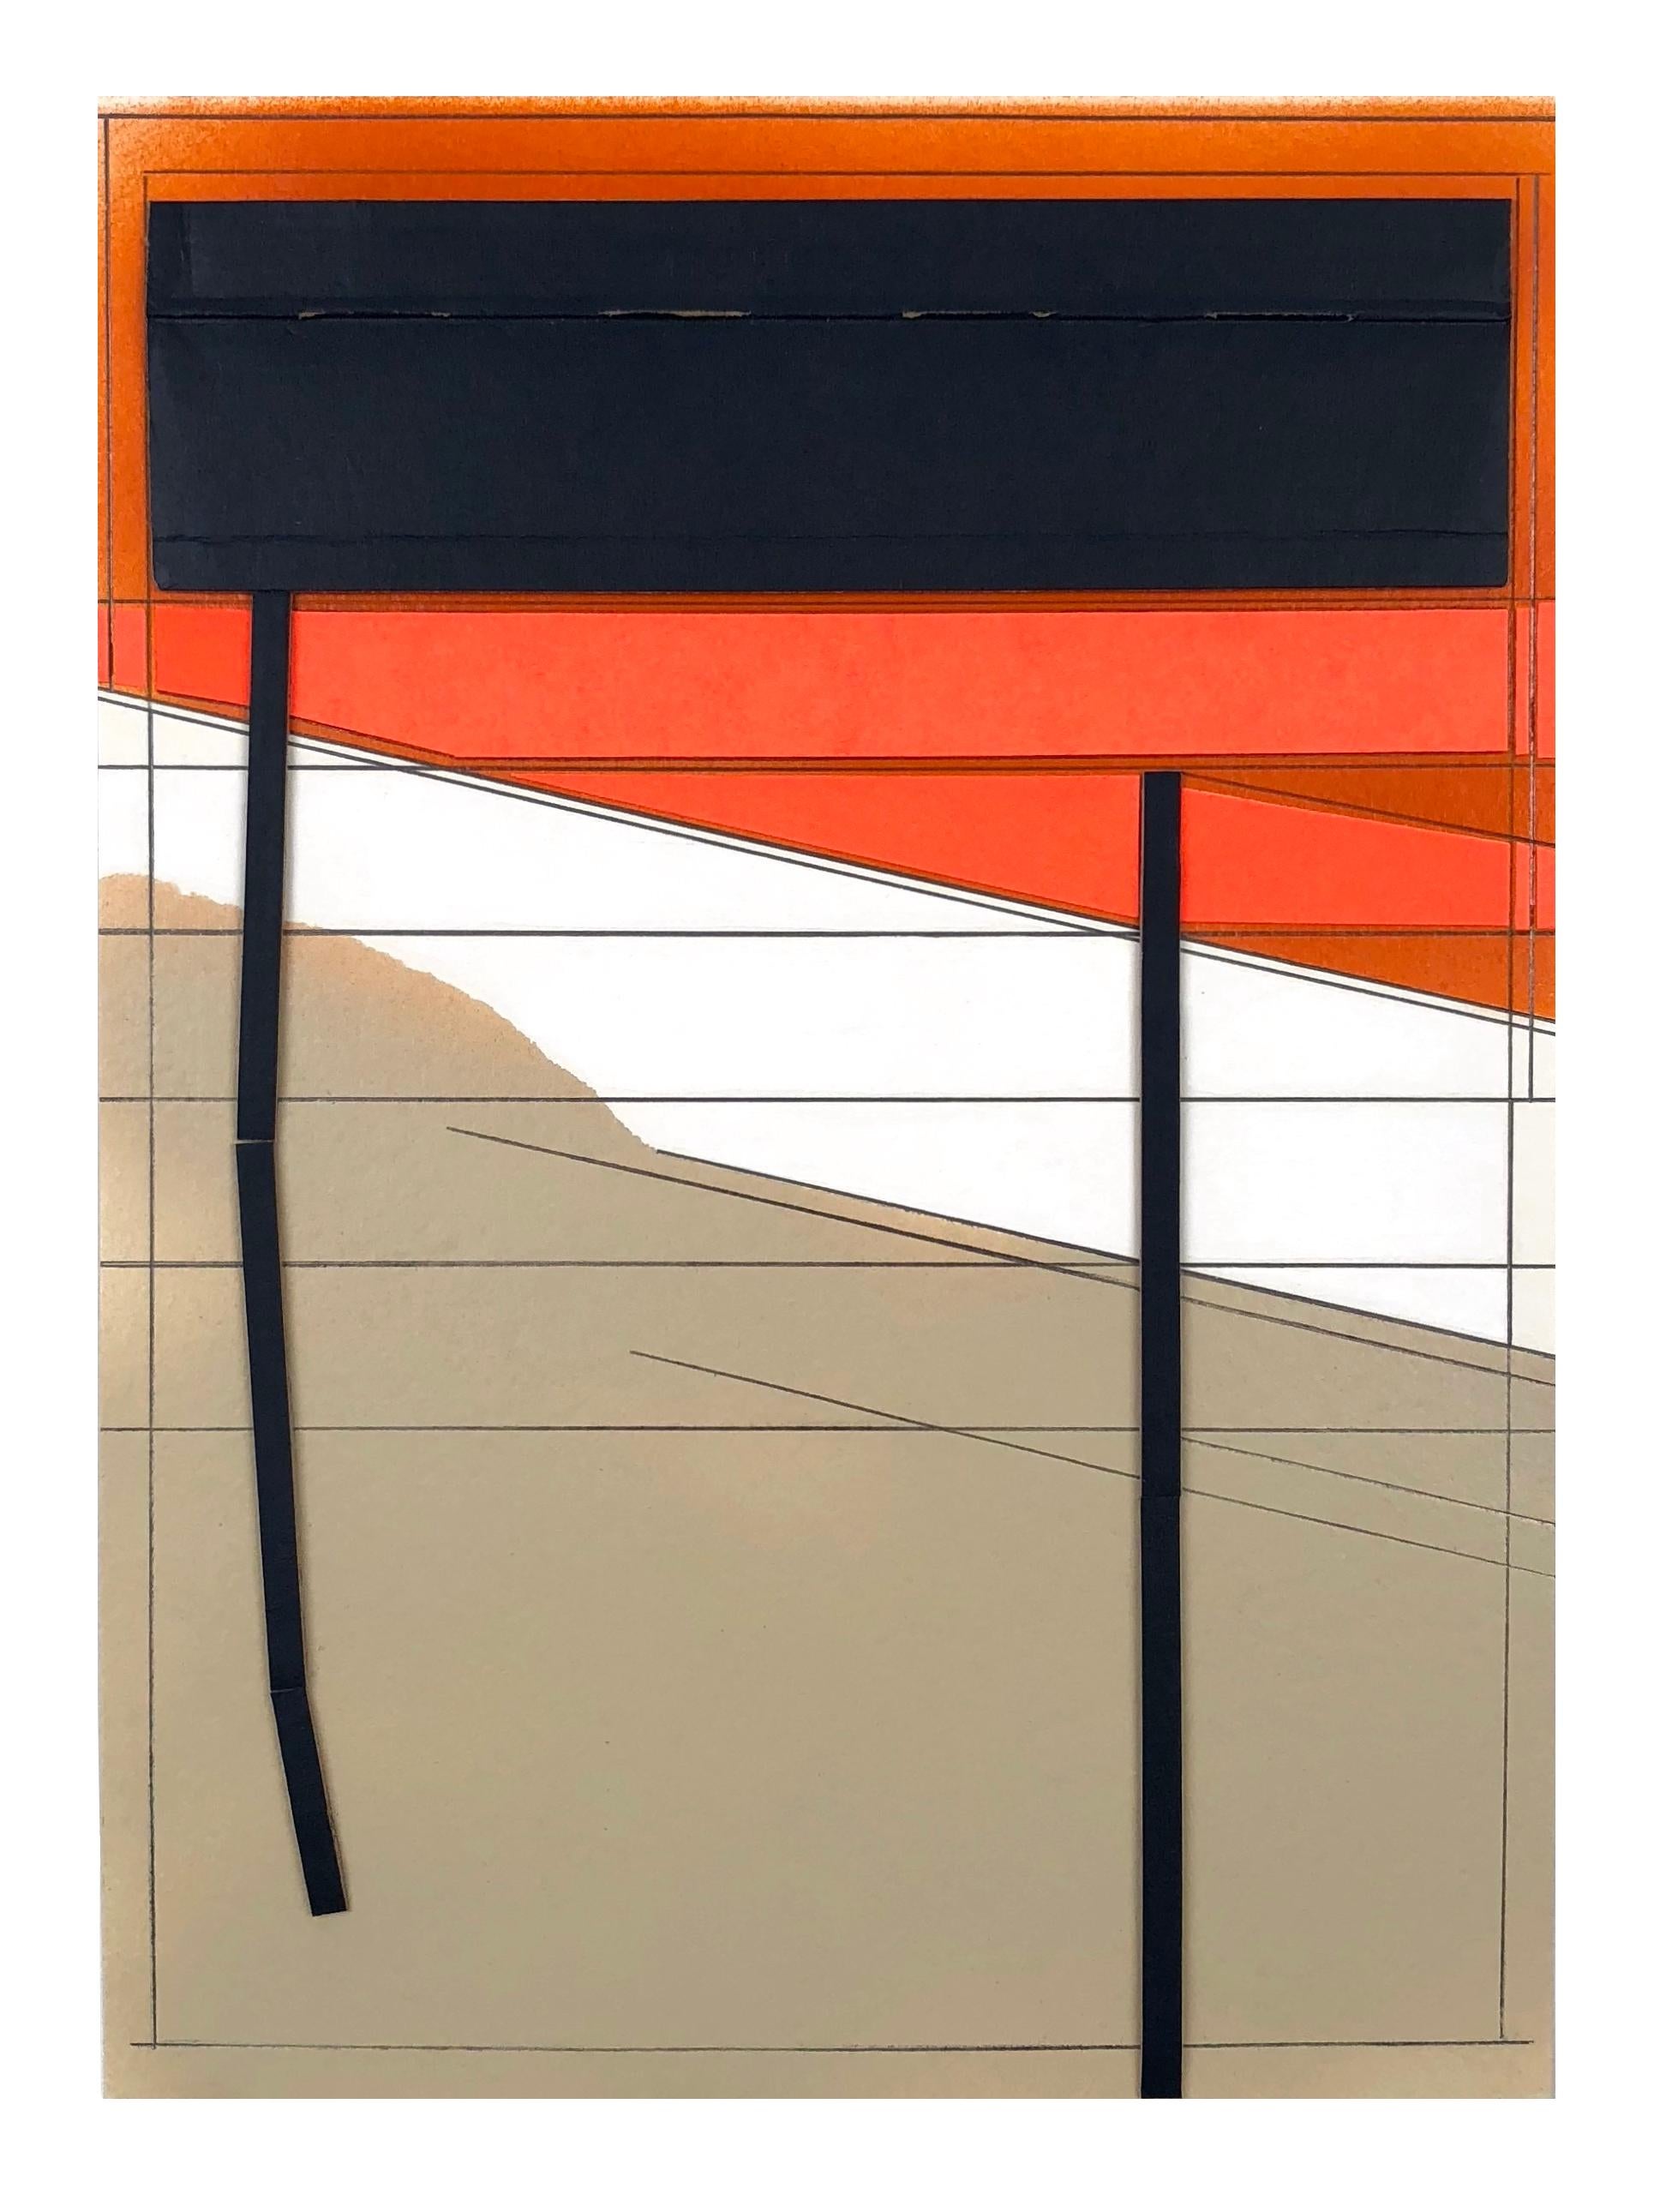 Ryan Sarah Murphy
Toma 3, 2018
collage, spray paint, pencil on paper
12 x 8.75 in.

This small abstract collage is bold and geometric, with sharp diagonal lines and bright shades of orange contrasted with black

"My creative practice is intuitive